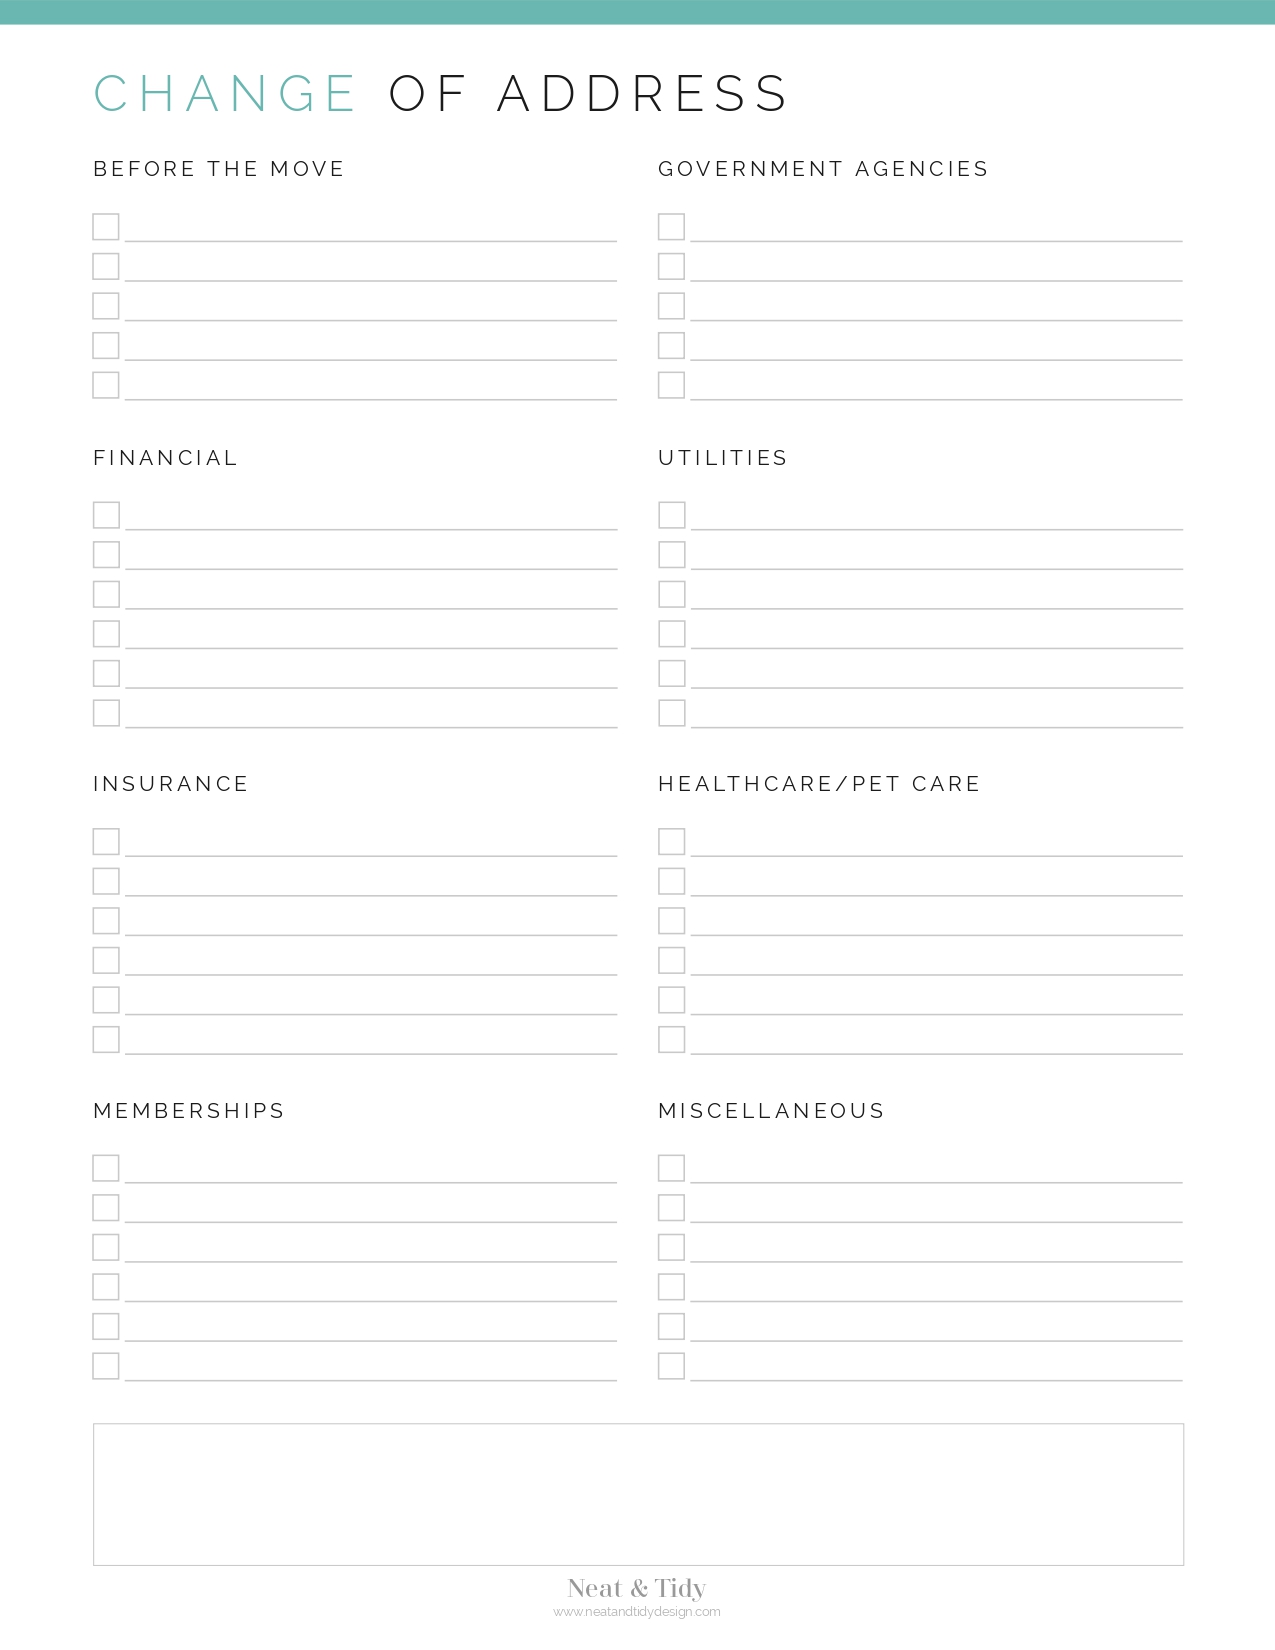 change-of-address-checklist-neat-and-tidy-design